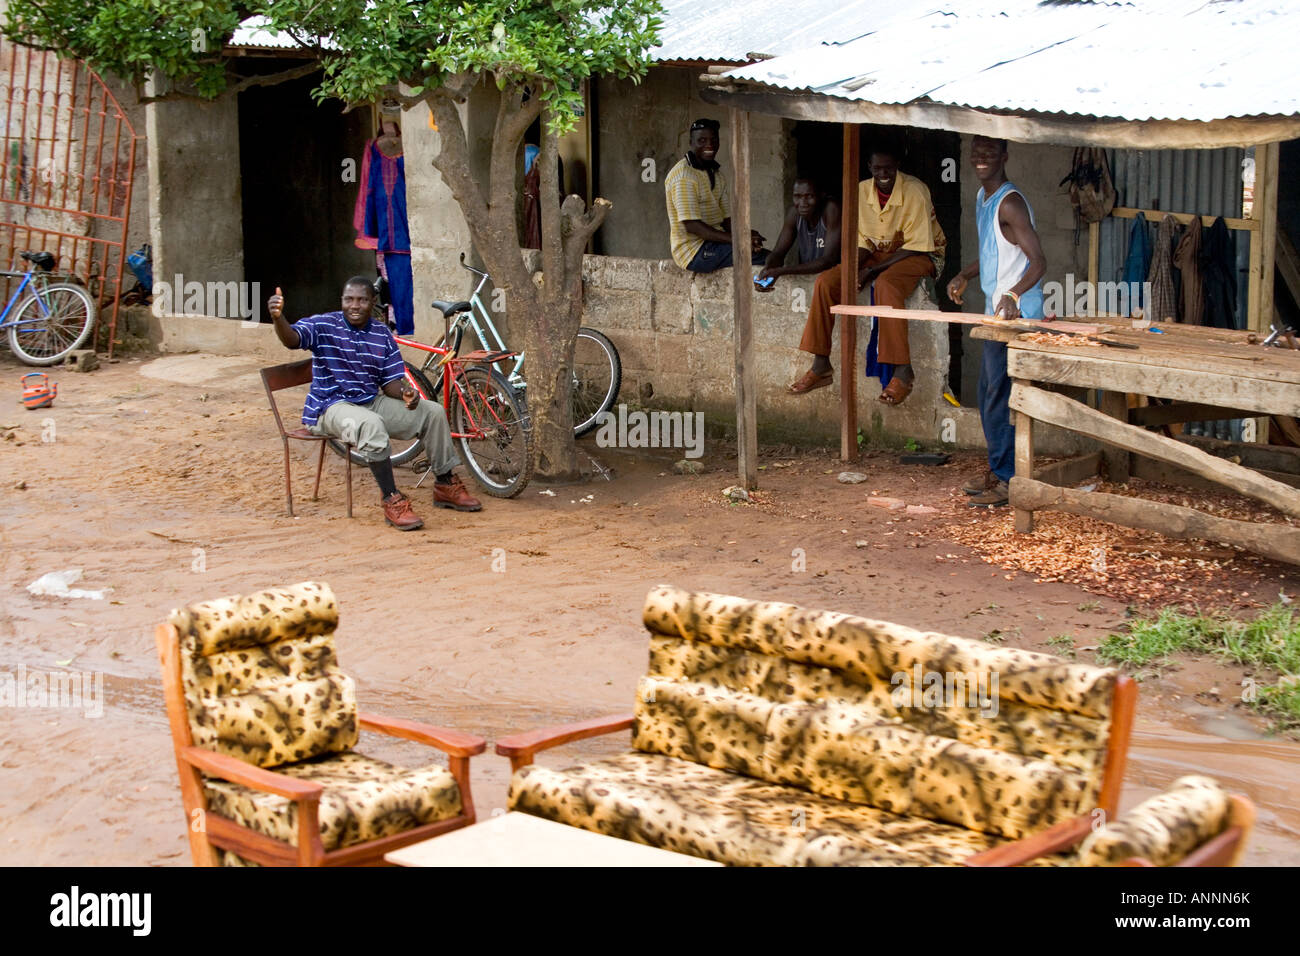 Typical everyday roadside scene in the Gambia, west Africa Stock Photo